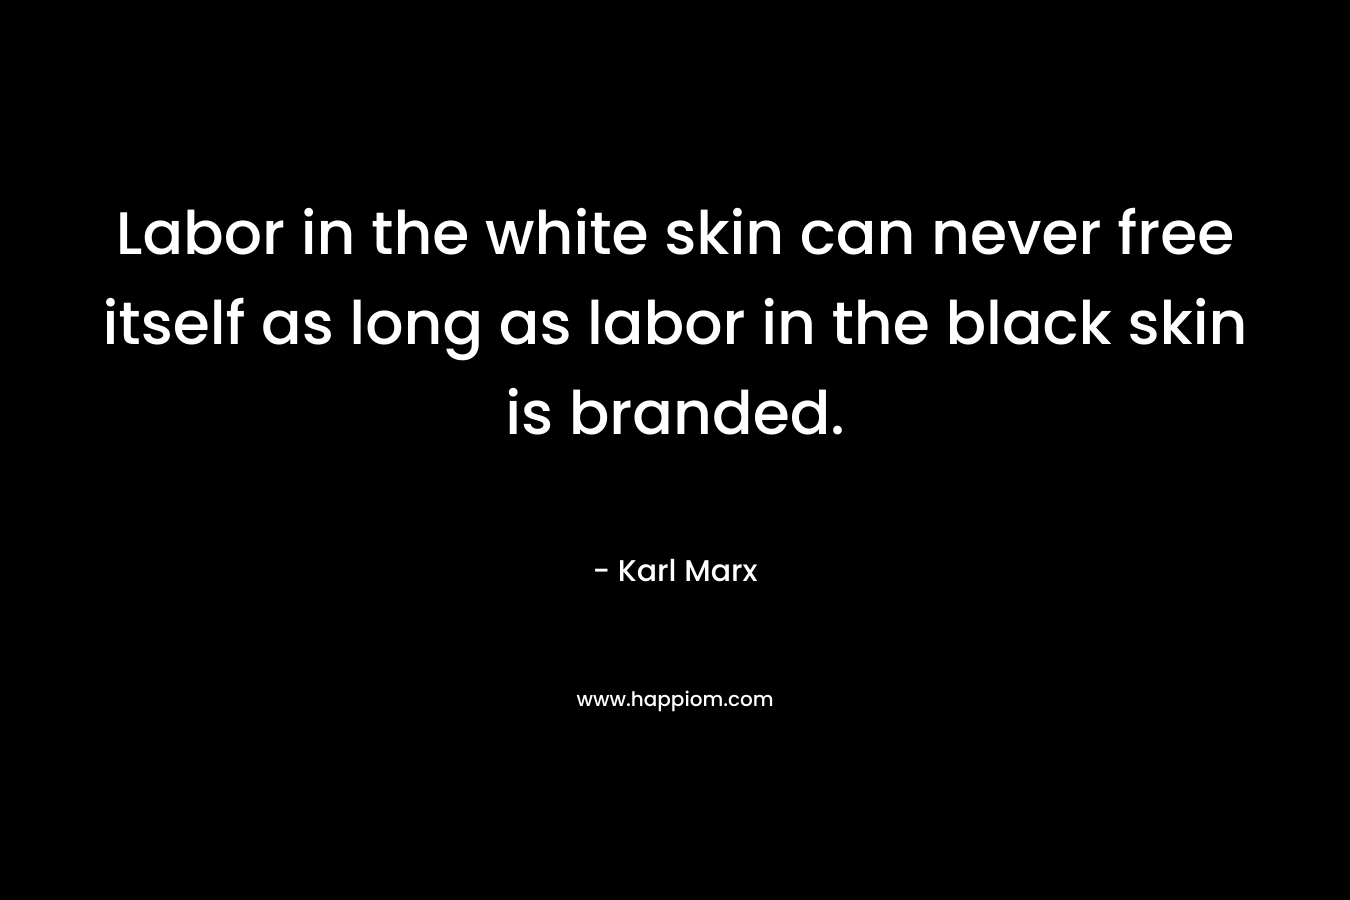 Labor in the white skin can never free itself as long as labor in the black skin is branded.